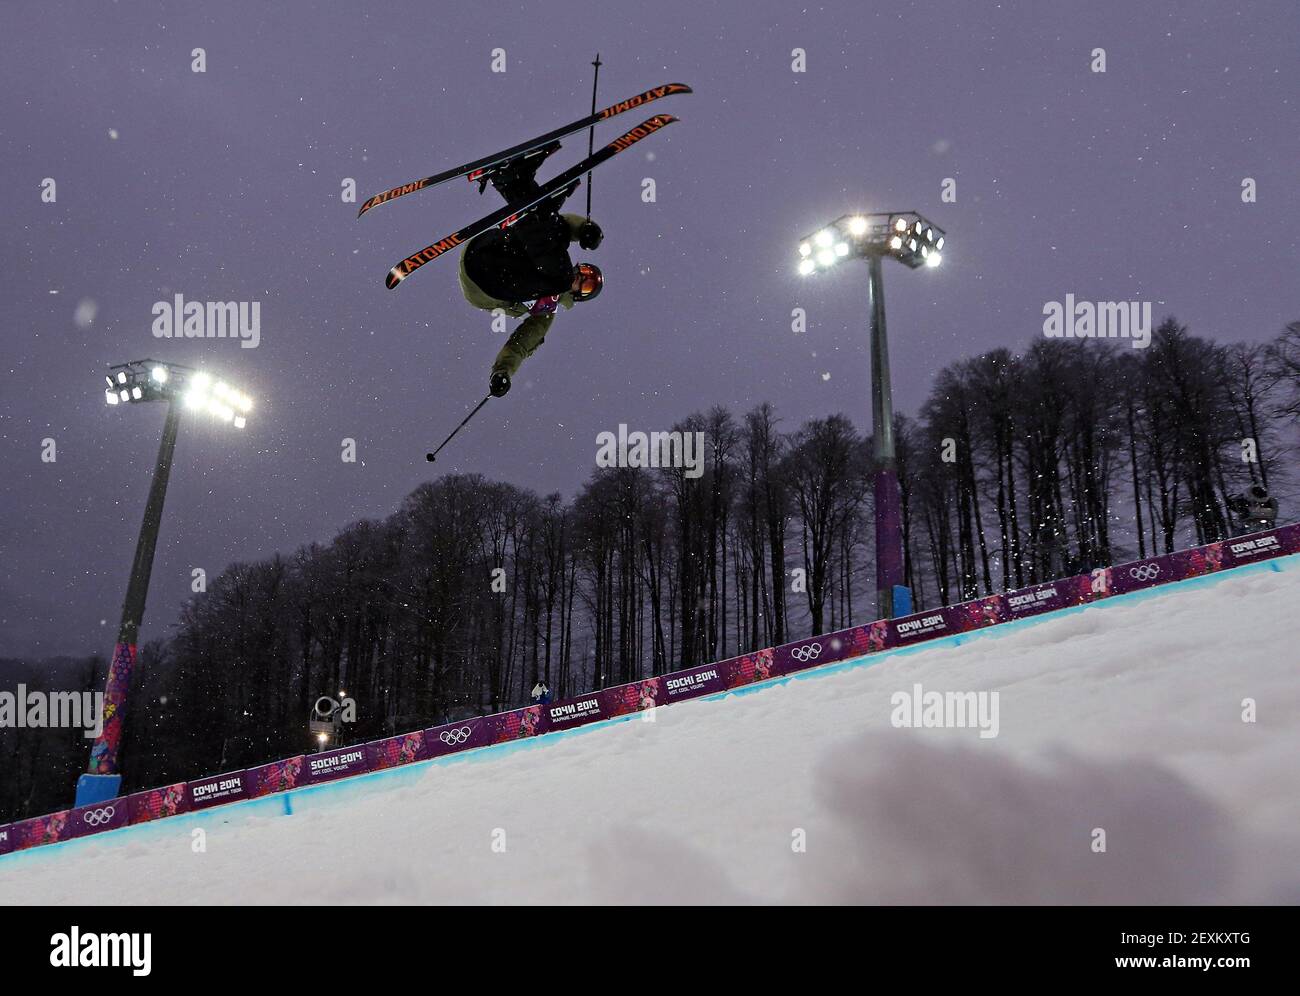 Yannic Lerjen of Switzerland competes in qualifying for the men's ski halfpipe at Rosa Khutor Extreme Park during the Winter Olympics in Sochi, Russia, Tuesday, Feb. 18, 2014. (Photo by Brian Cassella/Chicago Tribune/MCT/Sipa USA) Stock Photo